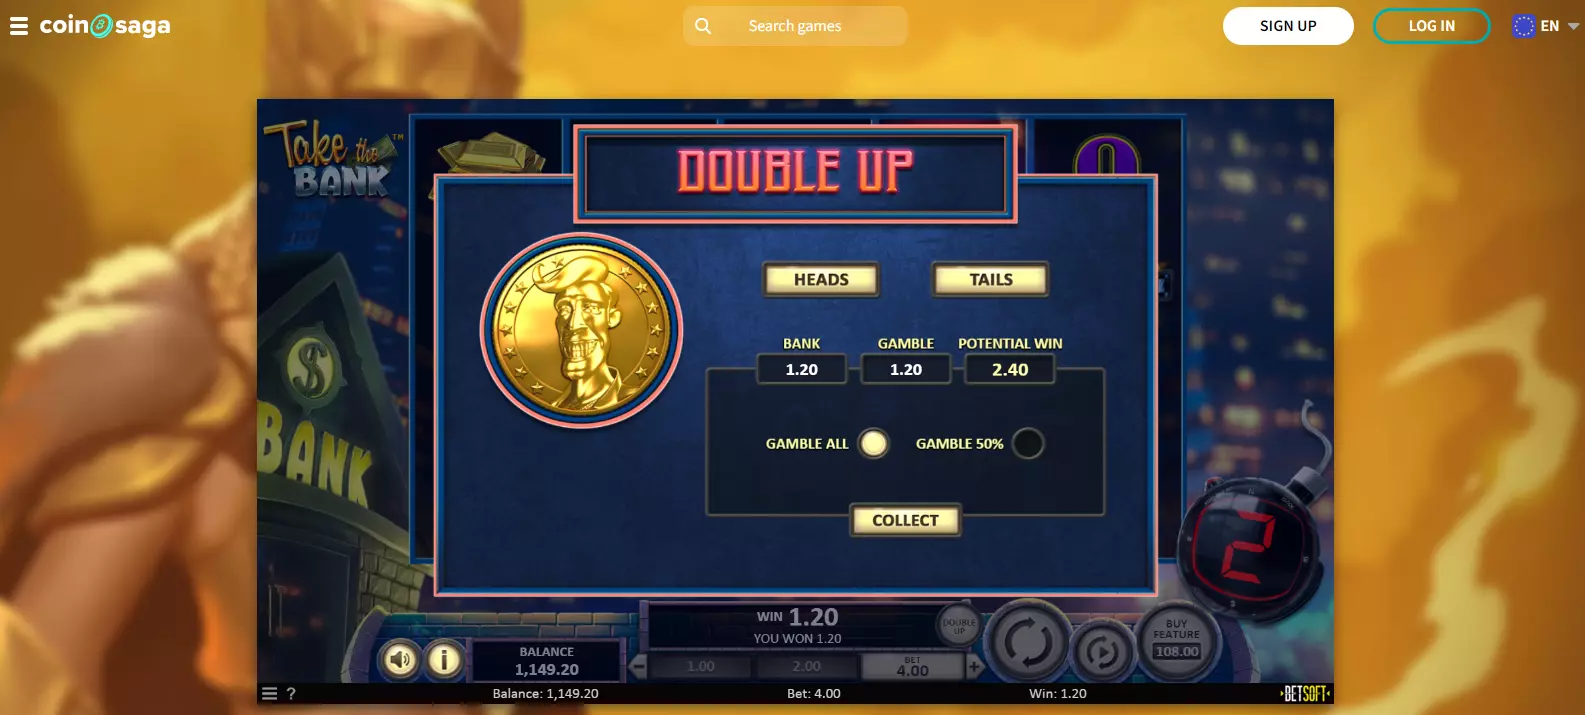 Take the Bank Slot Features